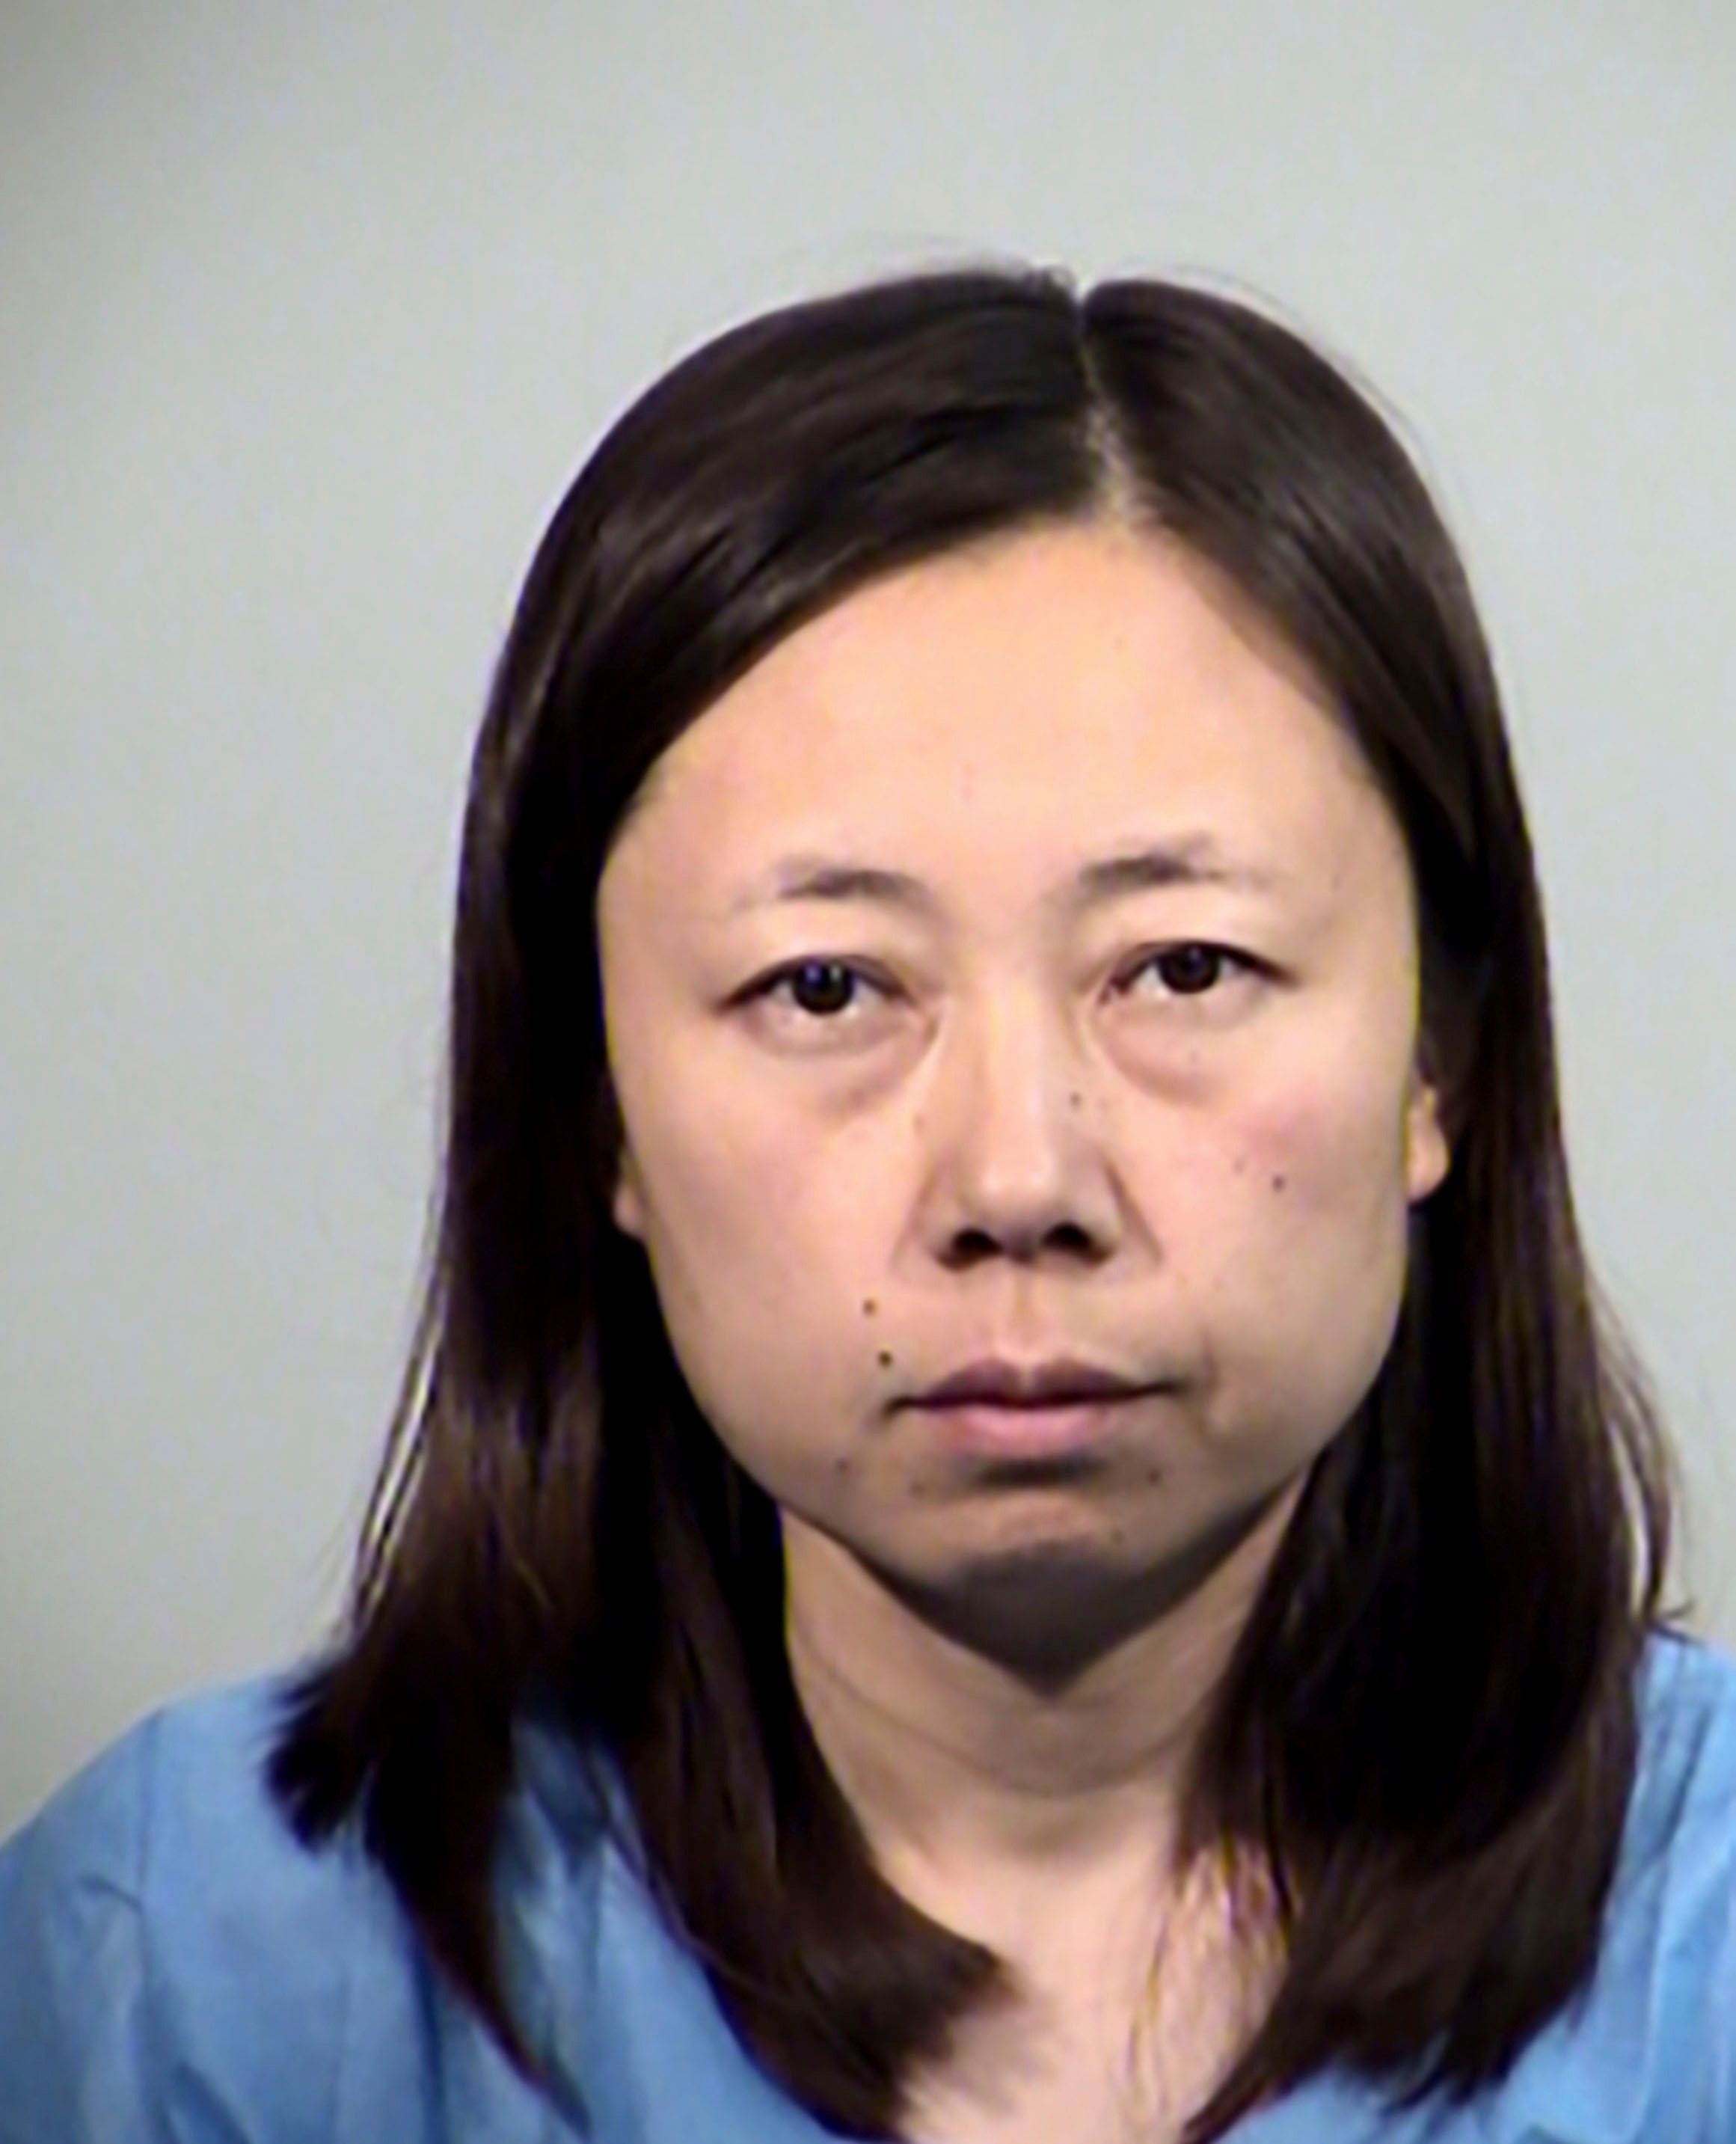 Arizona mom denies killing 2 children with meat cleaver Arizona Japan Police Your Honor Phoenix The Independent